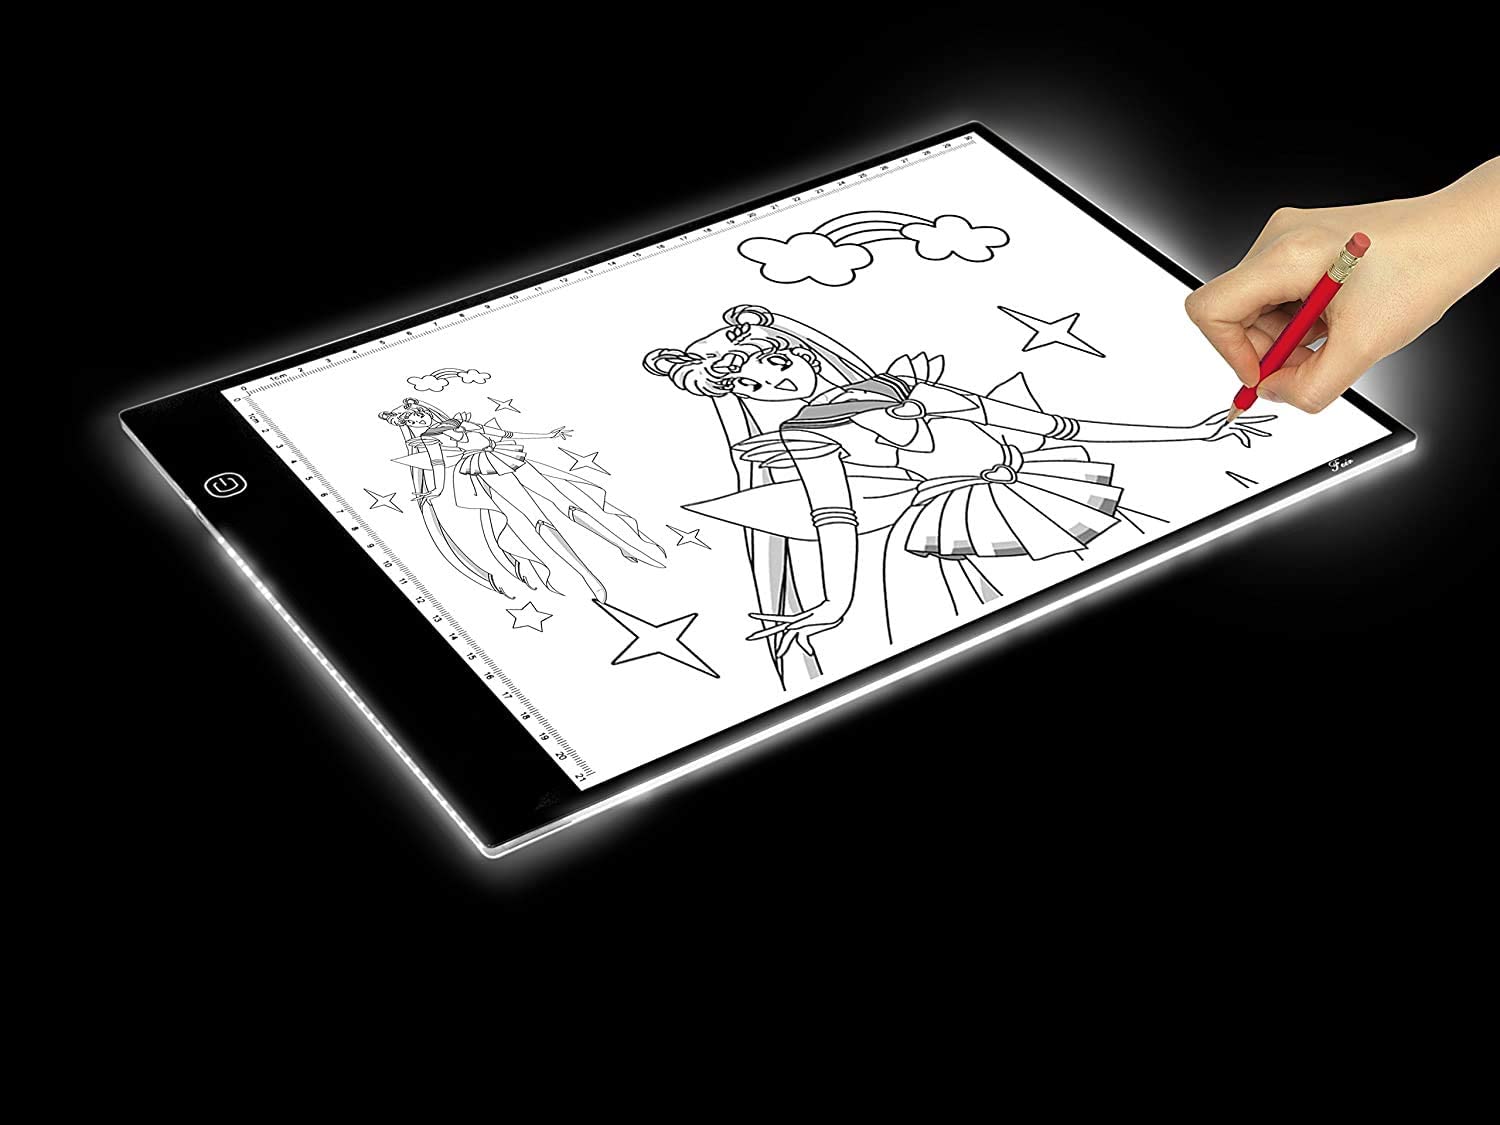 Tracing-Light-Board for Kids Drawing Yamteck A4-Light-Pad Sketching. LED-Tracing-Light-Box w Surface Magnetization Tech Diamond Painting Customized Protective Bag & Dimmable Brightness 